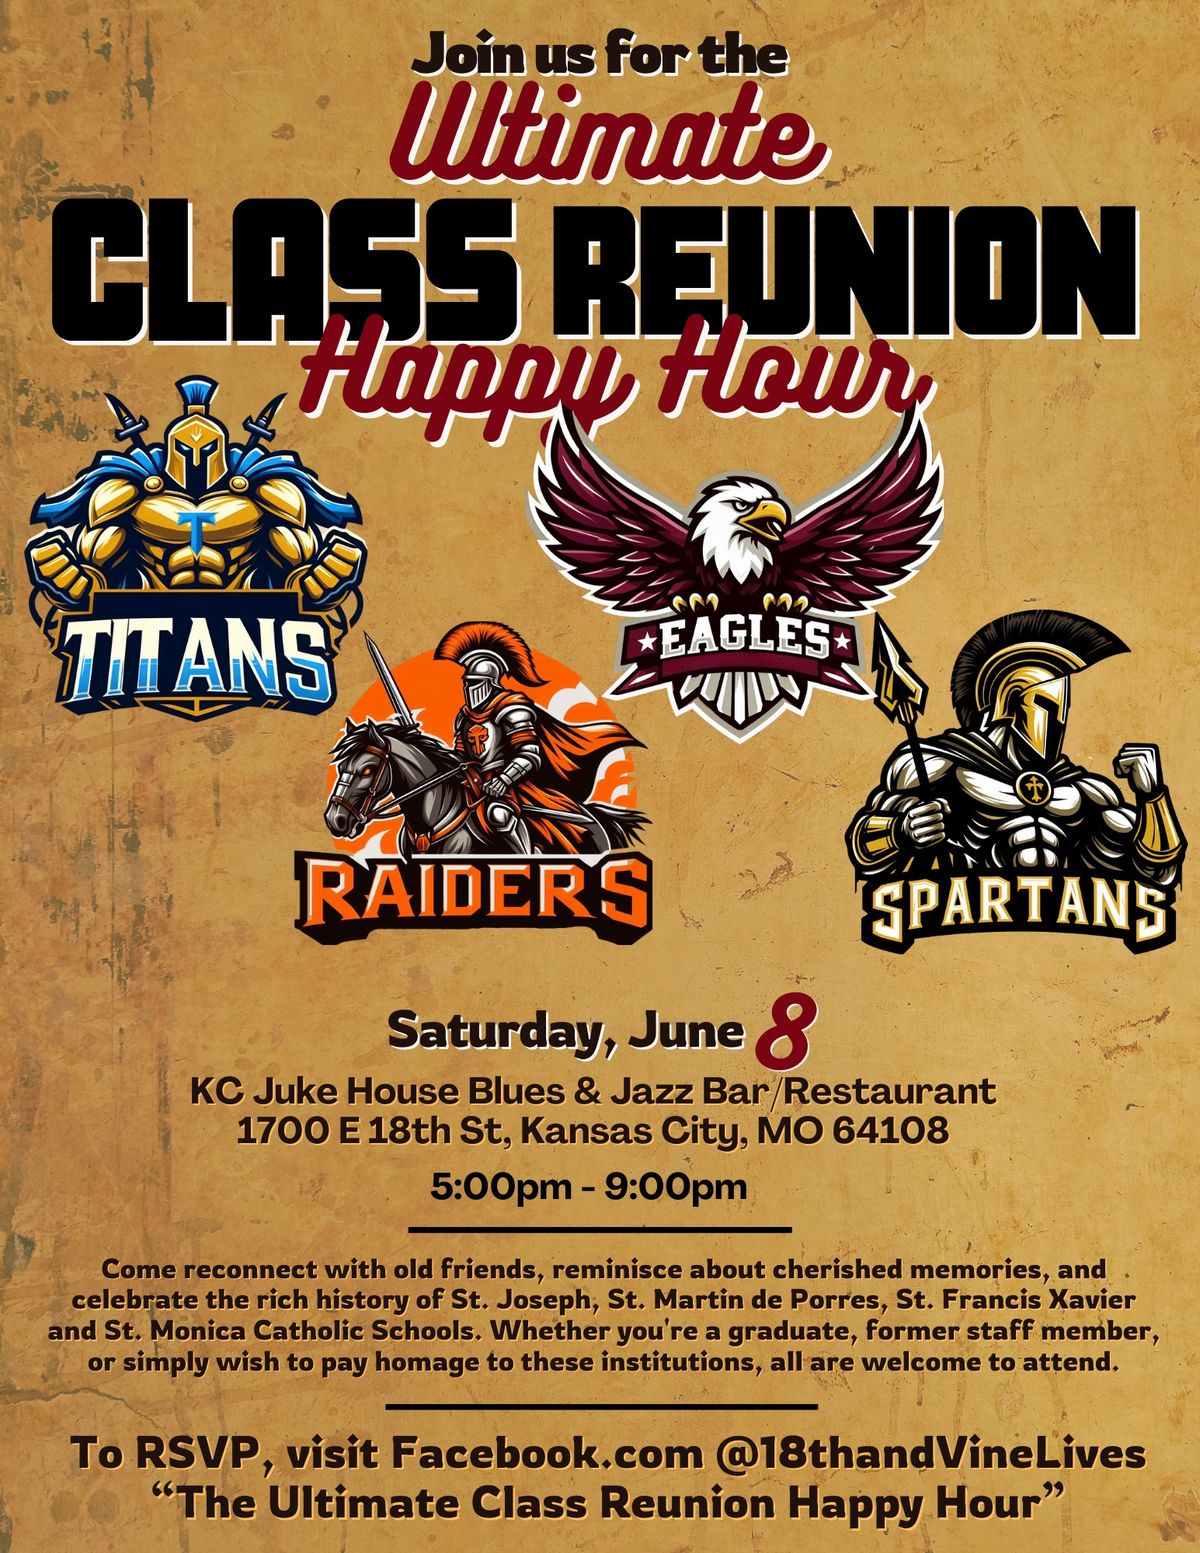 The Ultimate Class Reunion Happy Hour